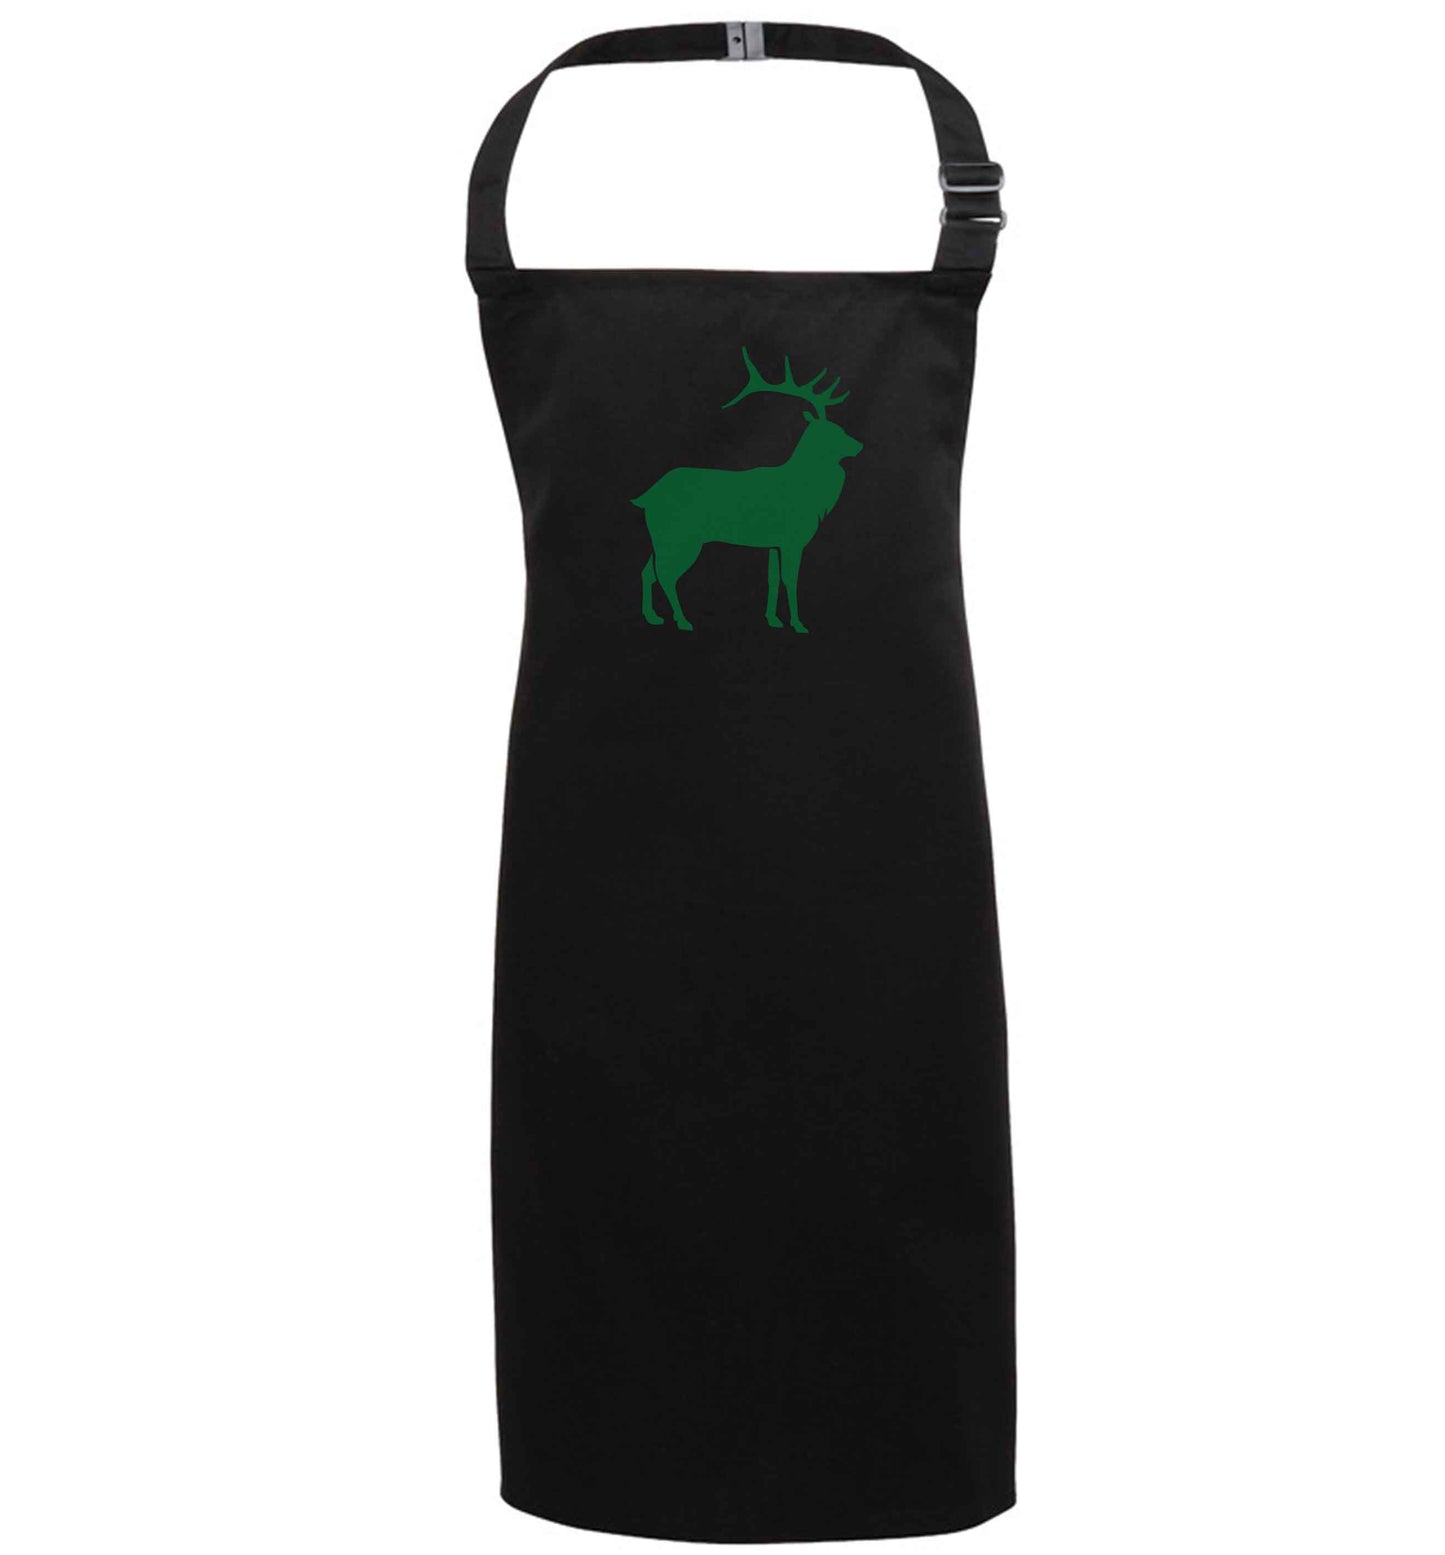 Green stag black apron 7-10 years